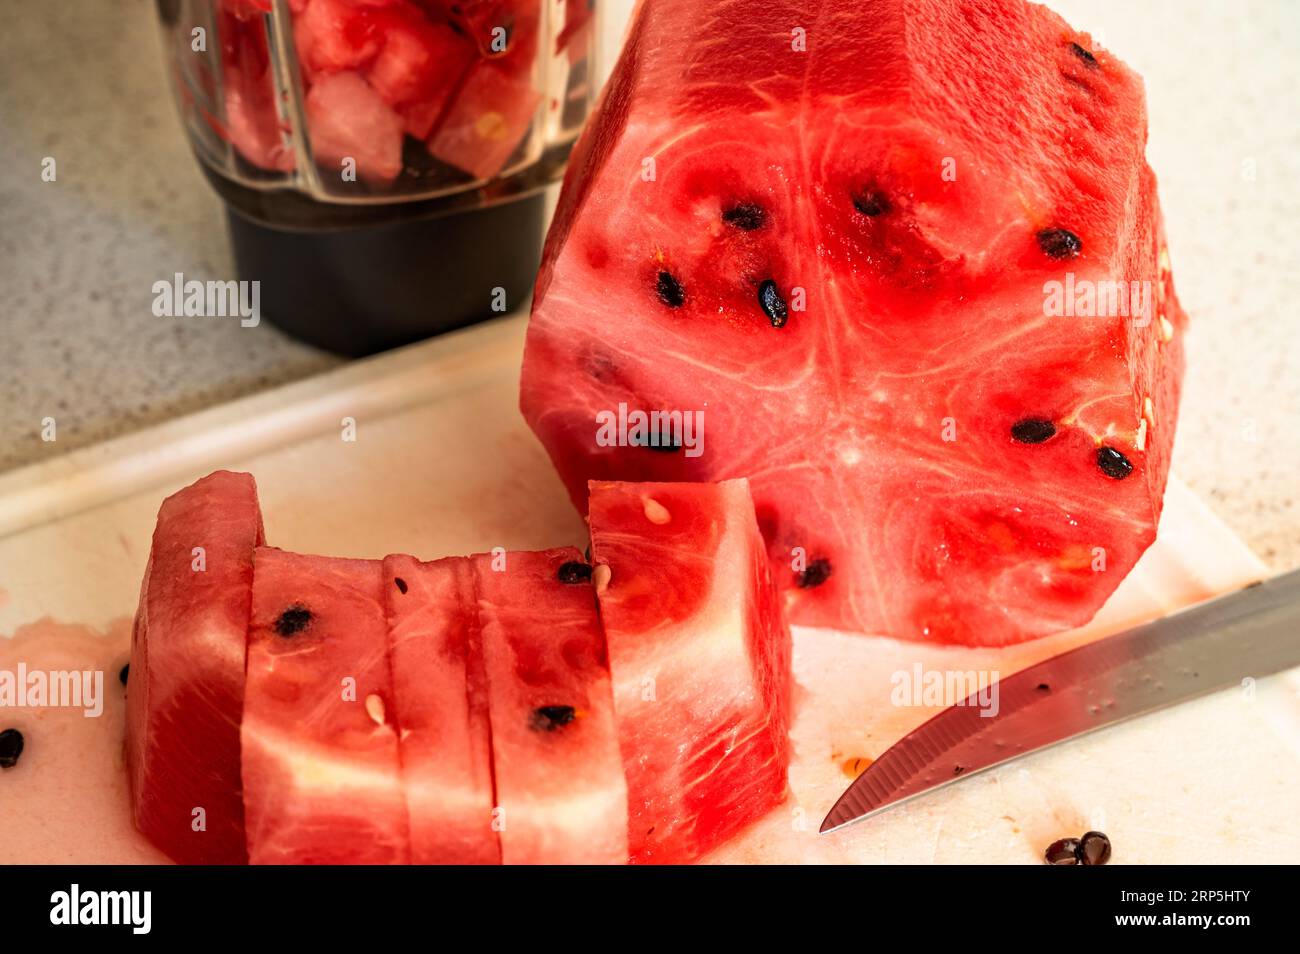 Sliced watermelon, knife and part of mixer on kitchen board, closeup. Stock Photo